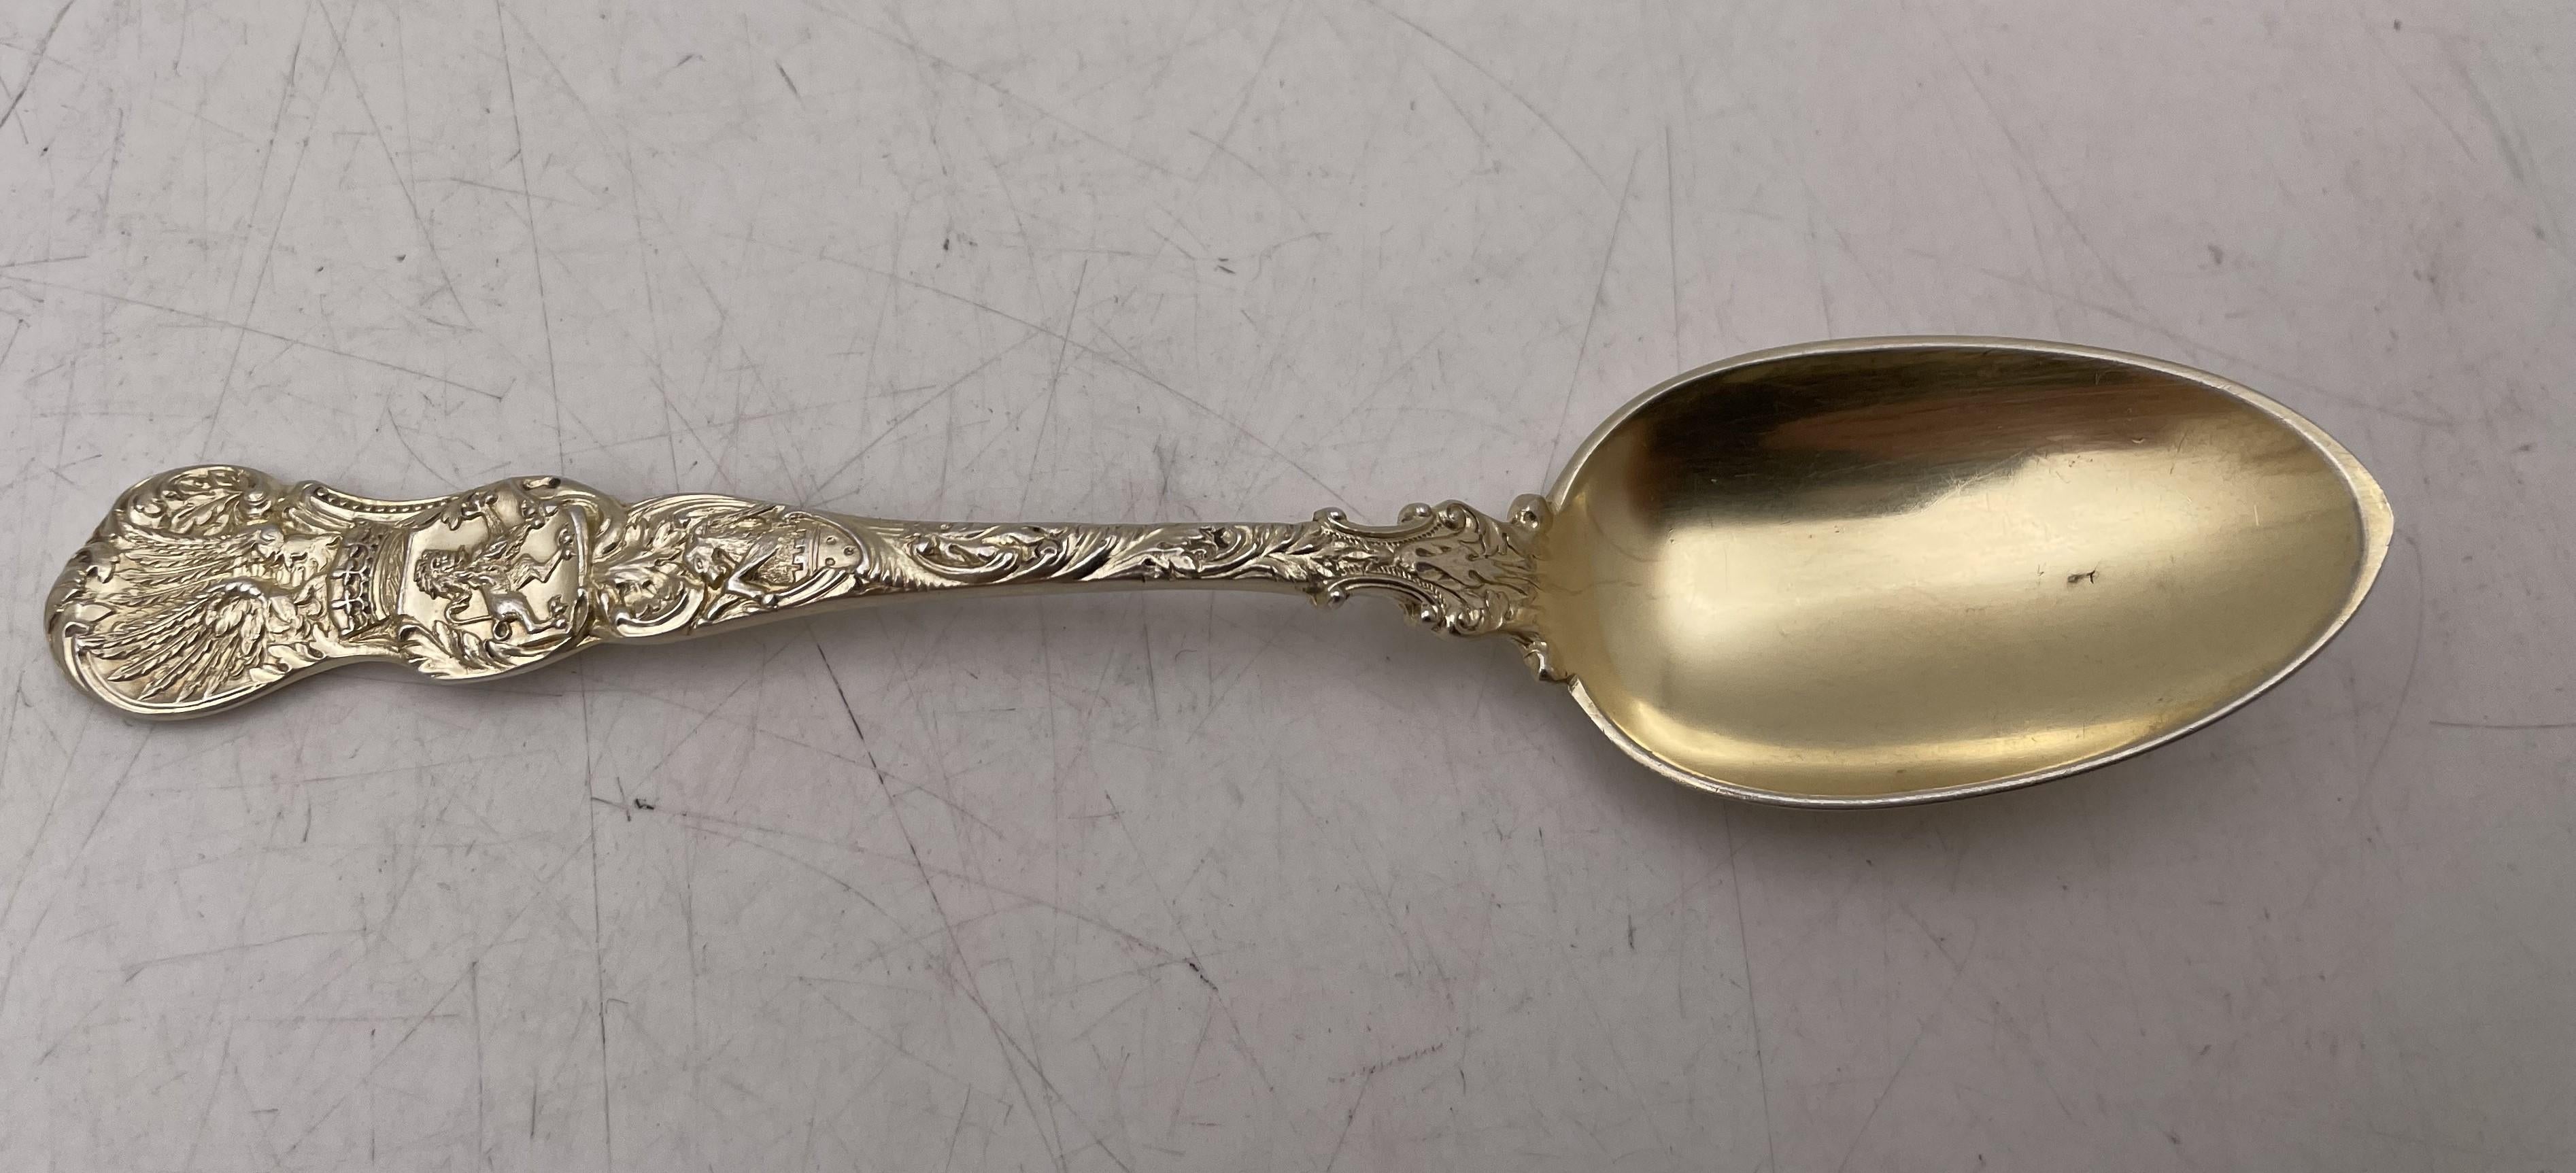 Durgin set of 12 gilt sterling silver teaspoons in the Heraldic pattern, beautifully adorned with a lion, a castle, and a crown, among other motifs. They measure 6'' in length and bear hallmarks and a monogram as shown. 

Please feel free to ask us